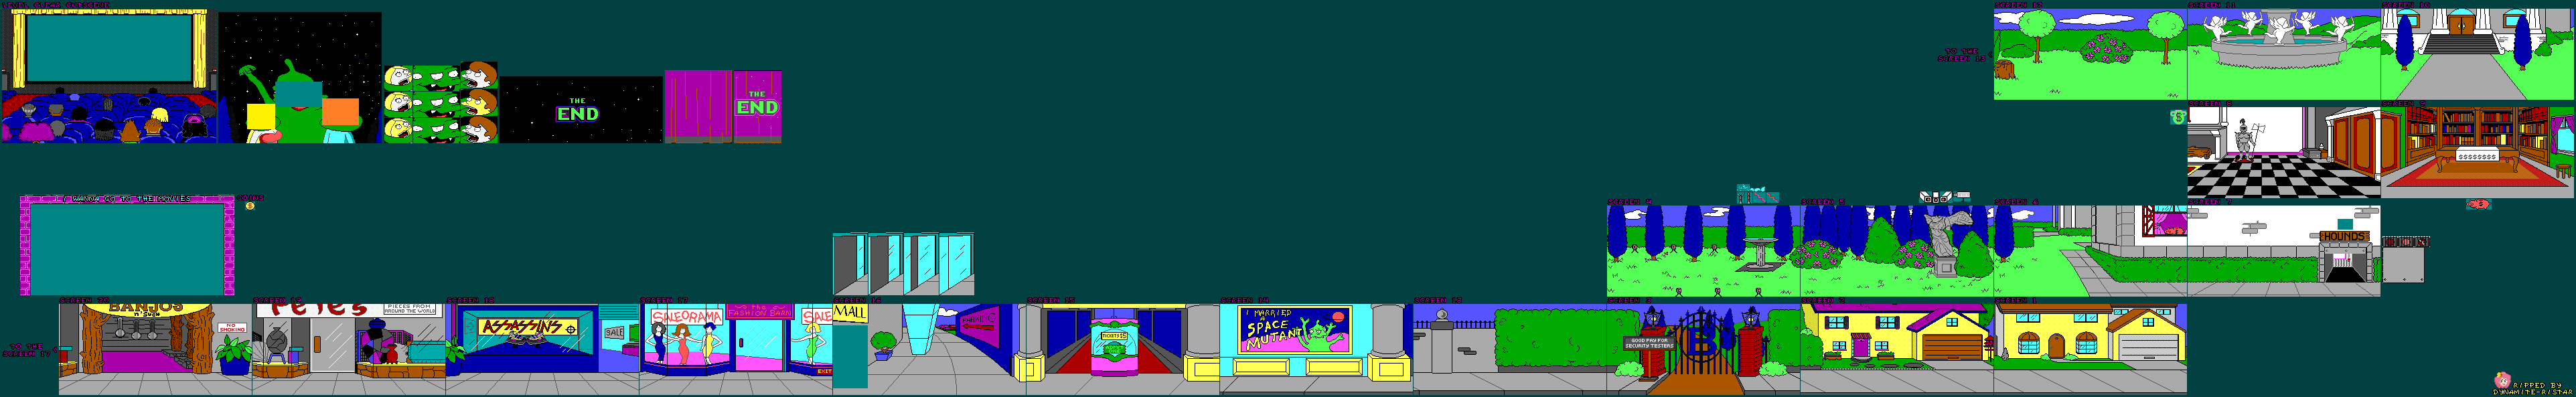 Bart Simpson's House of Weirdness (DOS) - I Wanna go to the Movies